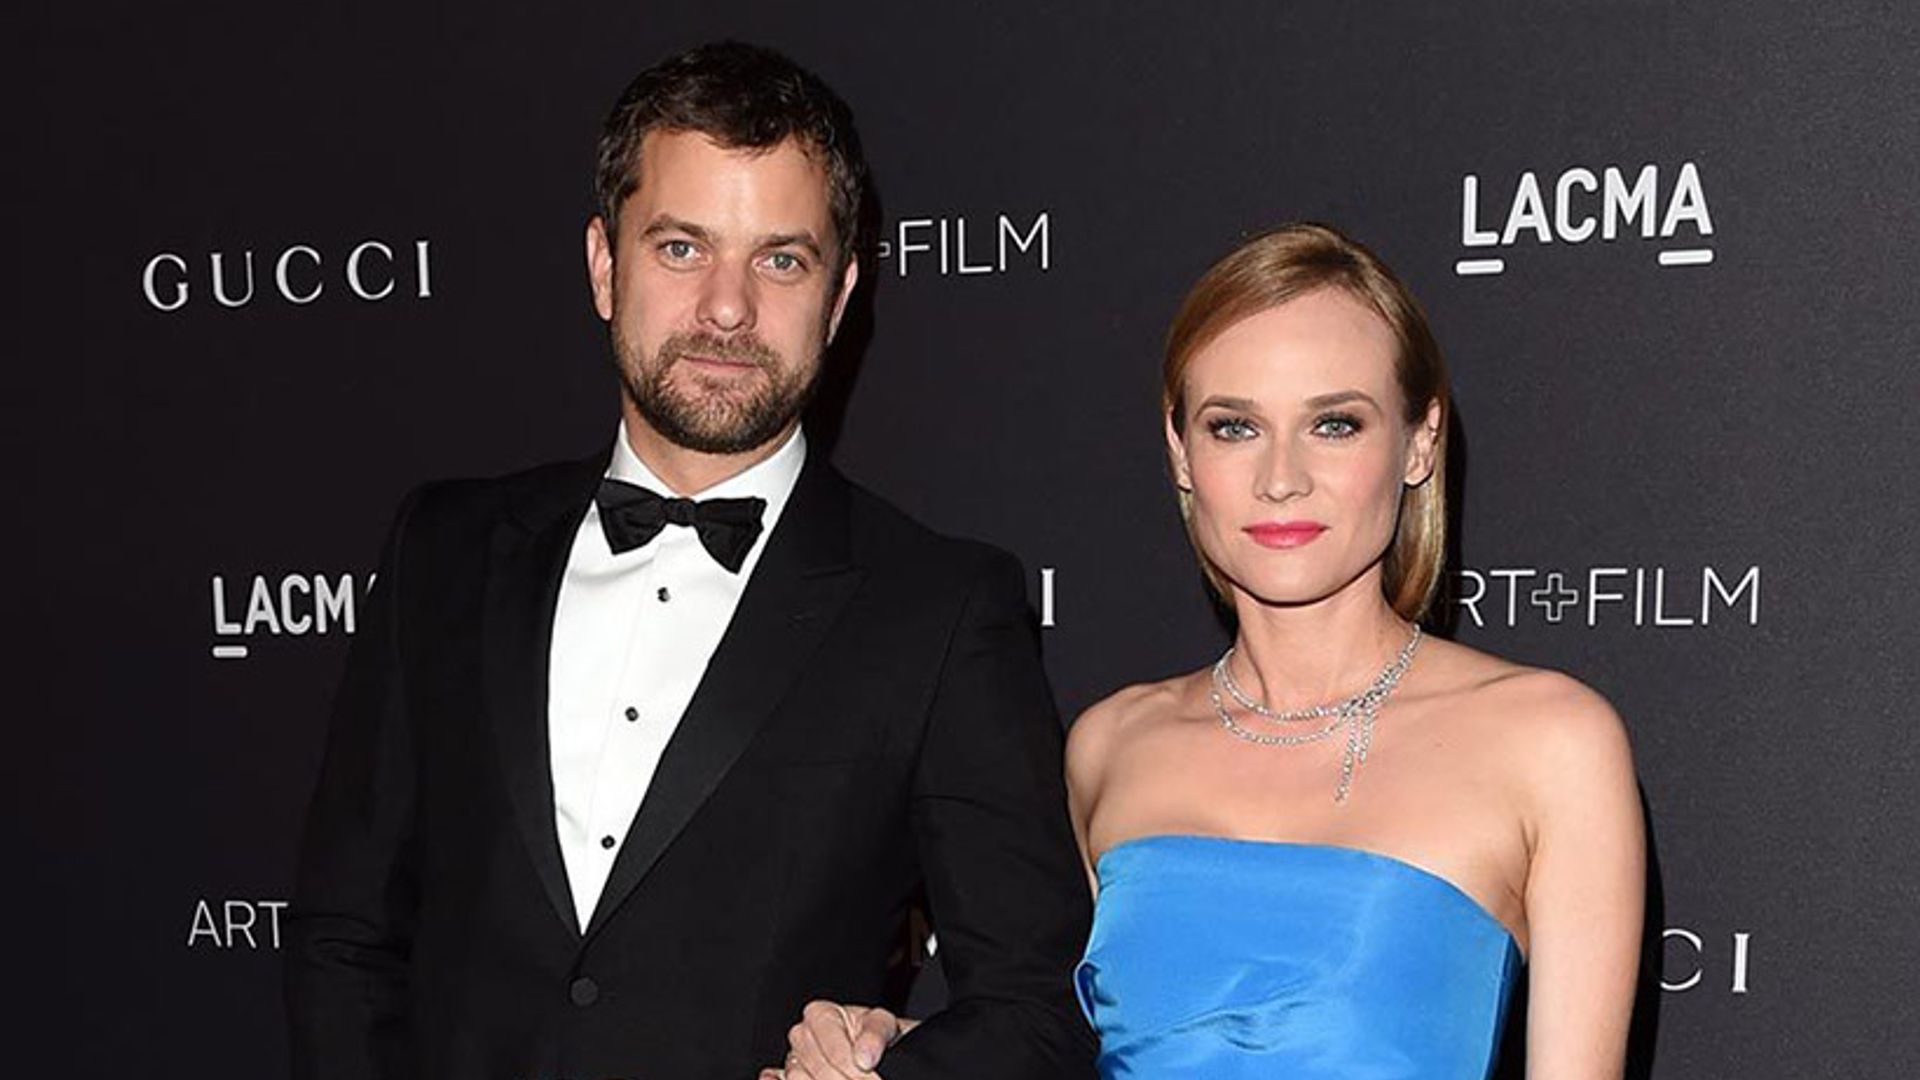 Joshua Jackson posts sweet message to Diane Kruger after her Best Actress win at Cannes